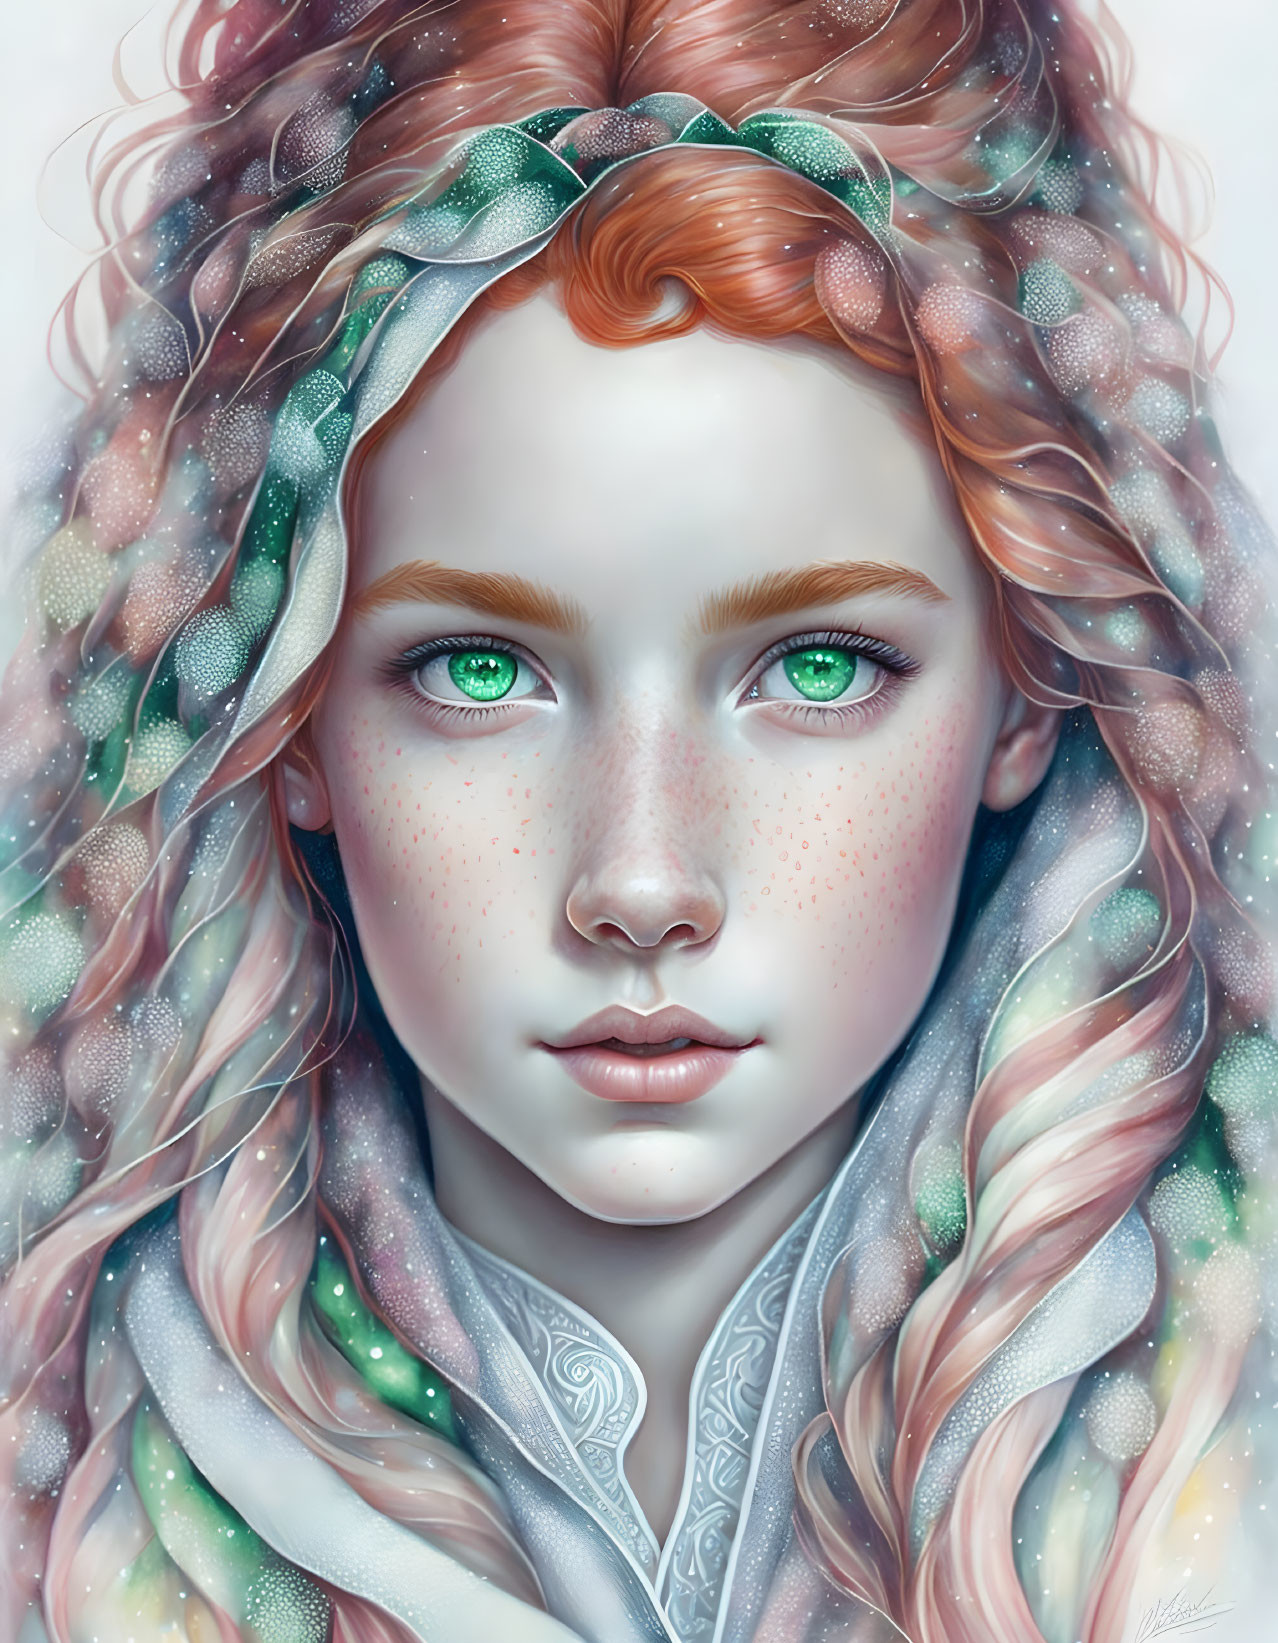 Vibrant red-haired girl with emerald green eyes in digital portrait